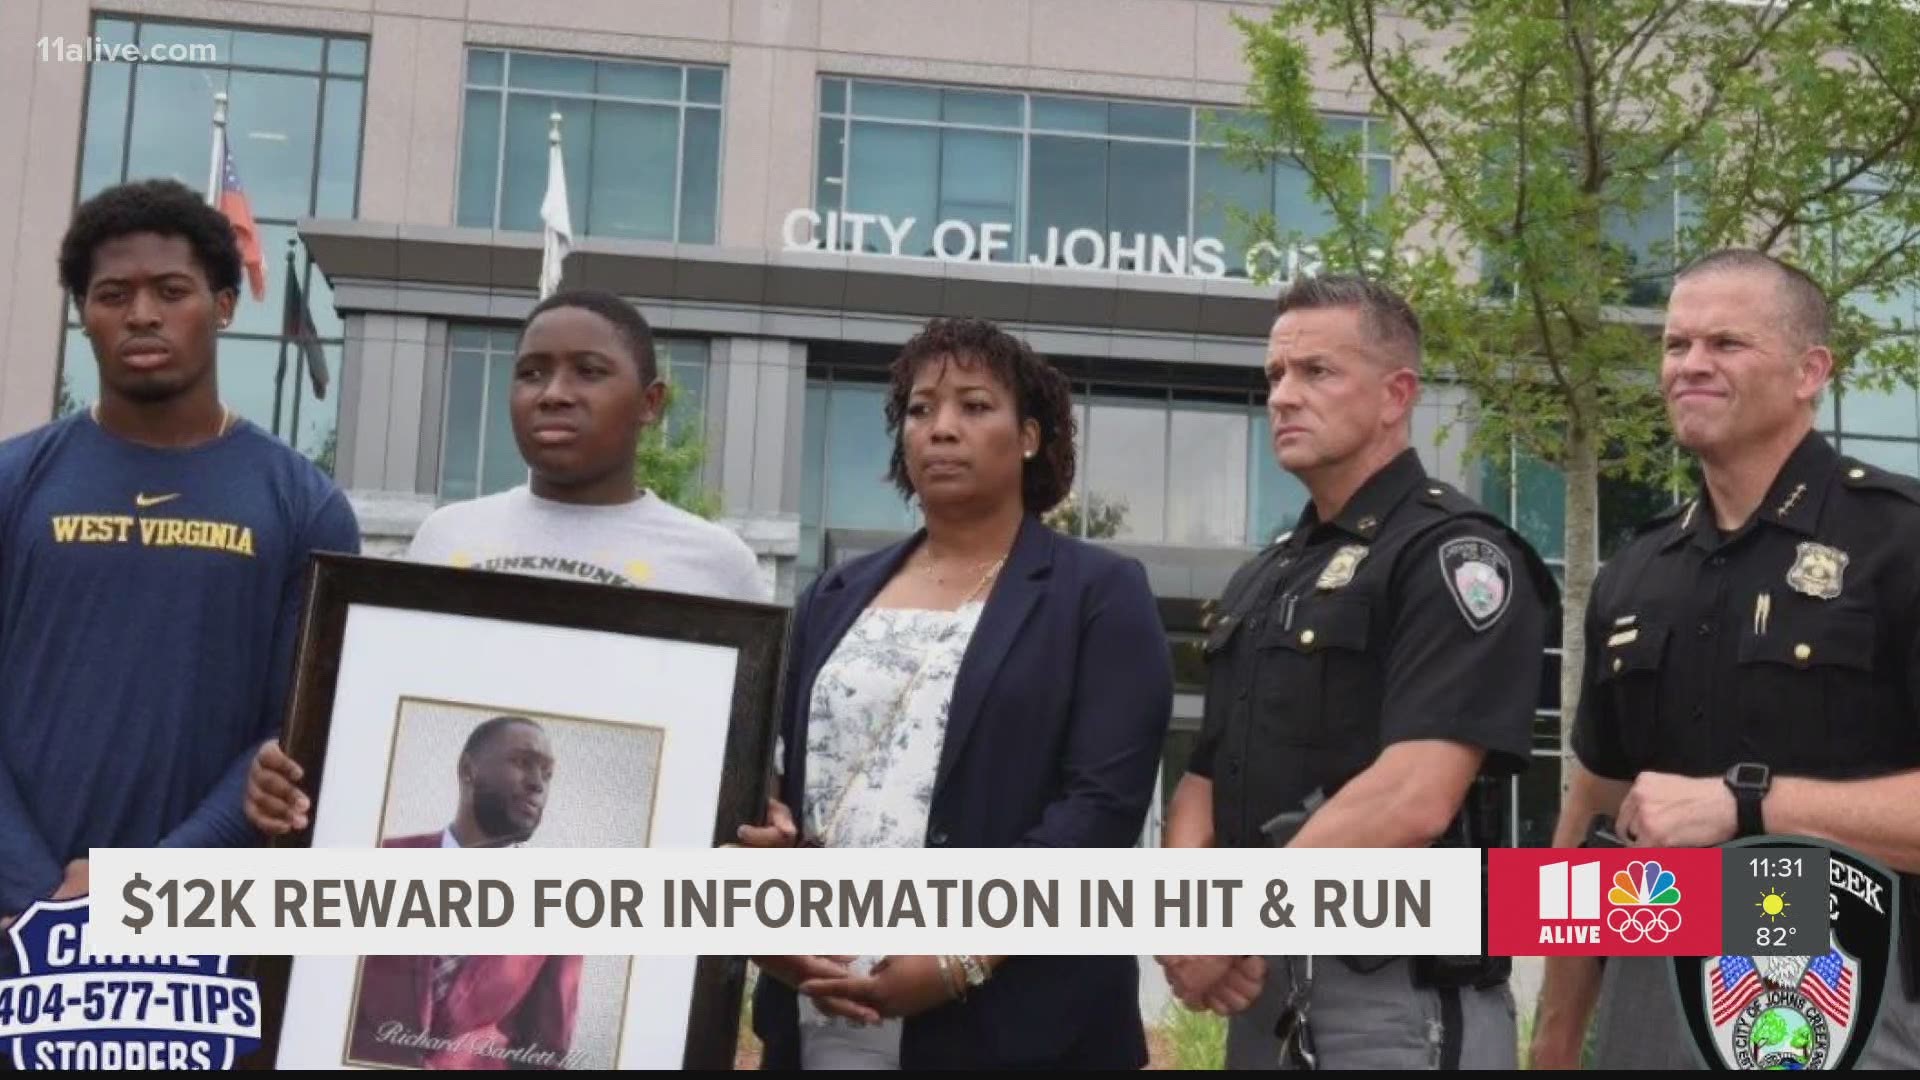 The family of a man who was killed in June in a hit-and-run in Johns Creek is renewing their search for justice with a $10K reward for information leading to arrest